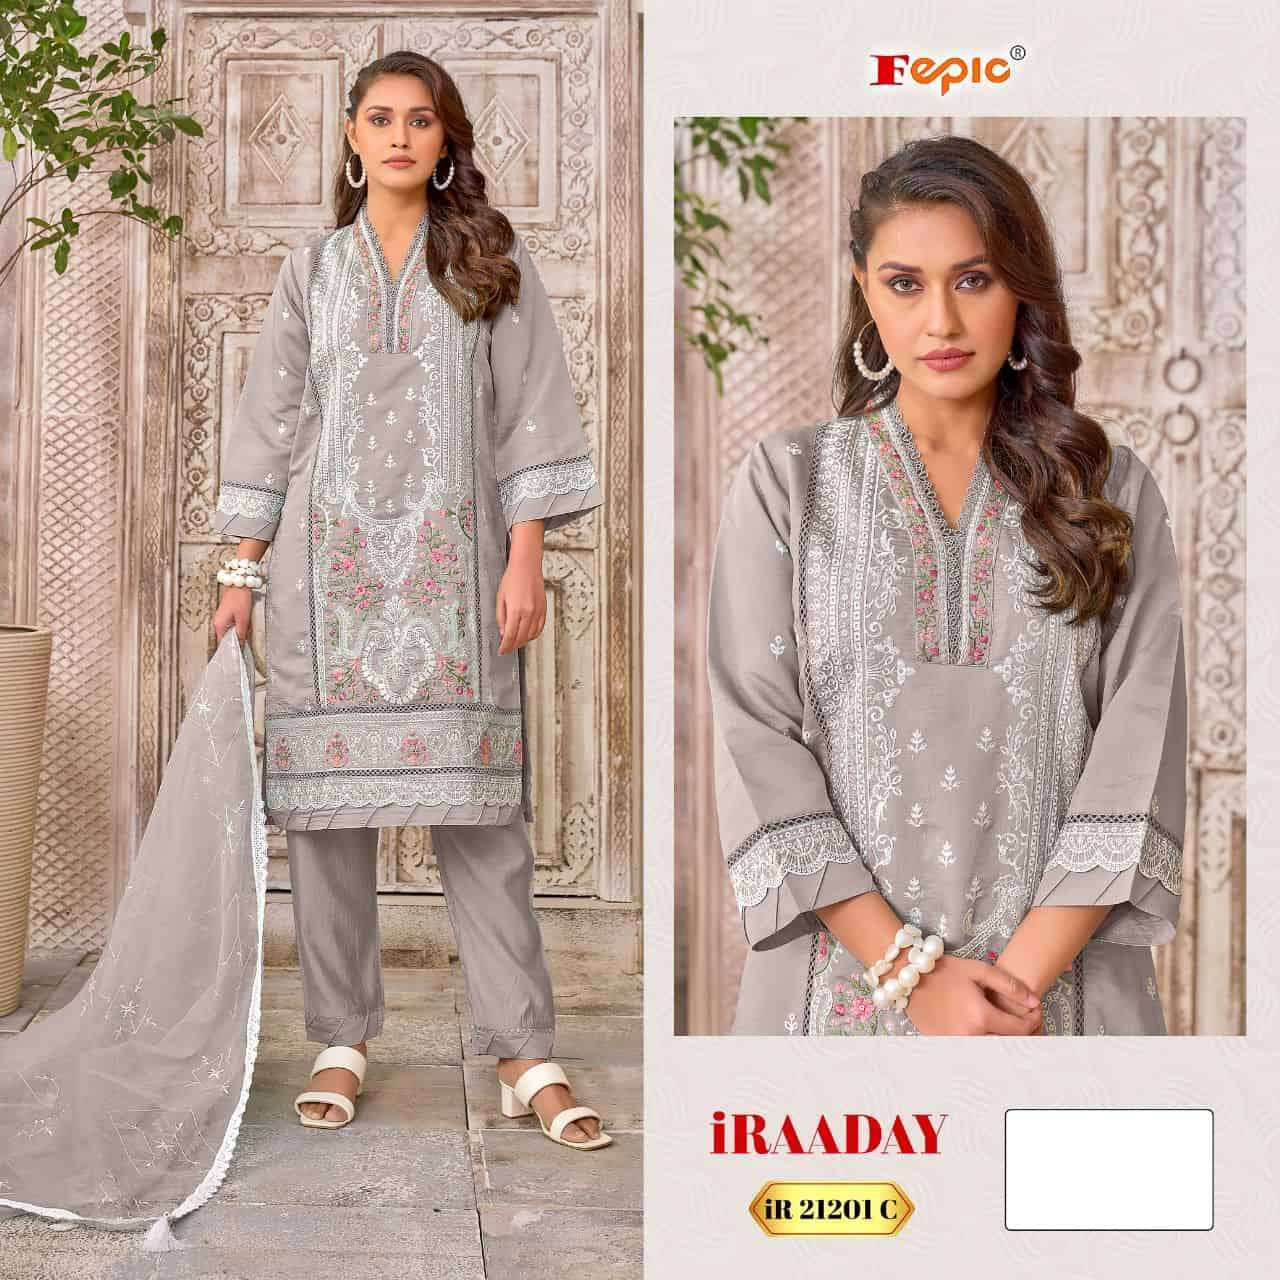 FEPIC IRAADAY IR 21021 COLORS EMBROIDERY DESIGNER PAKISTANI SUIT COLLECTION WHOLESALE PRICE 